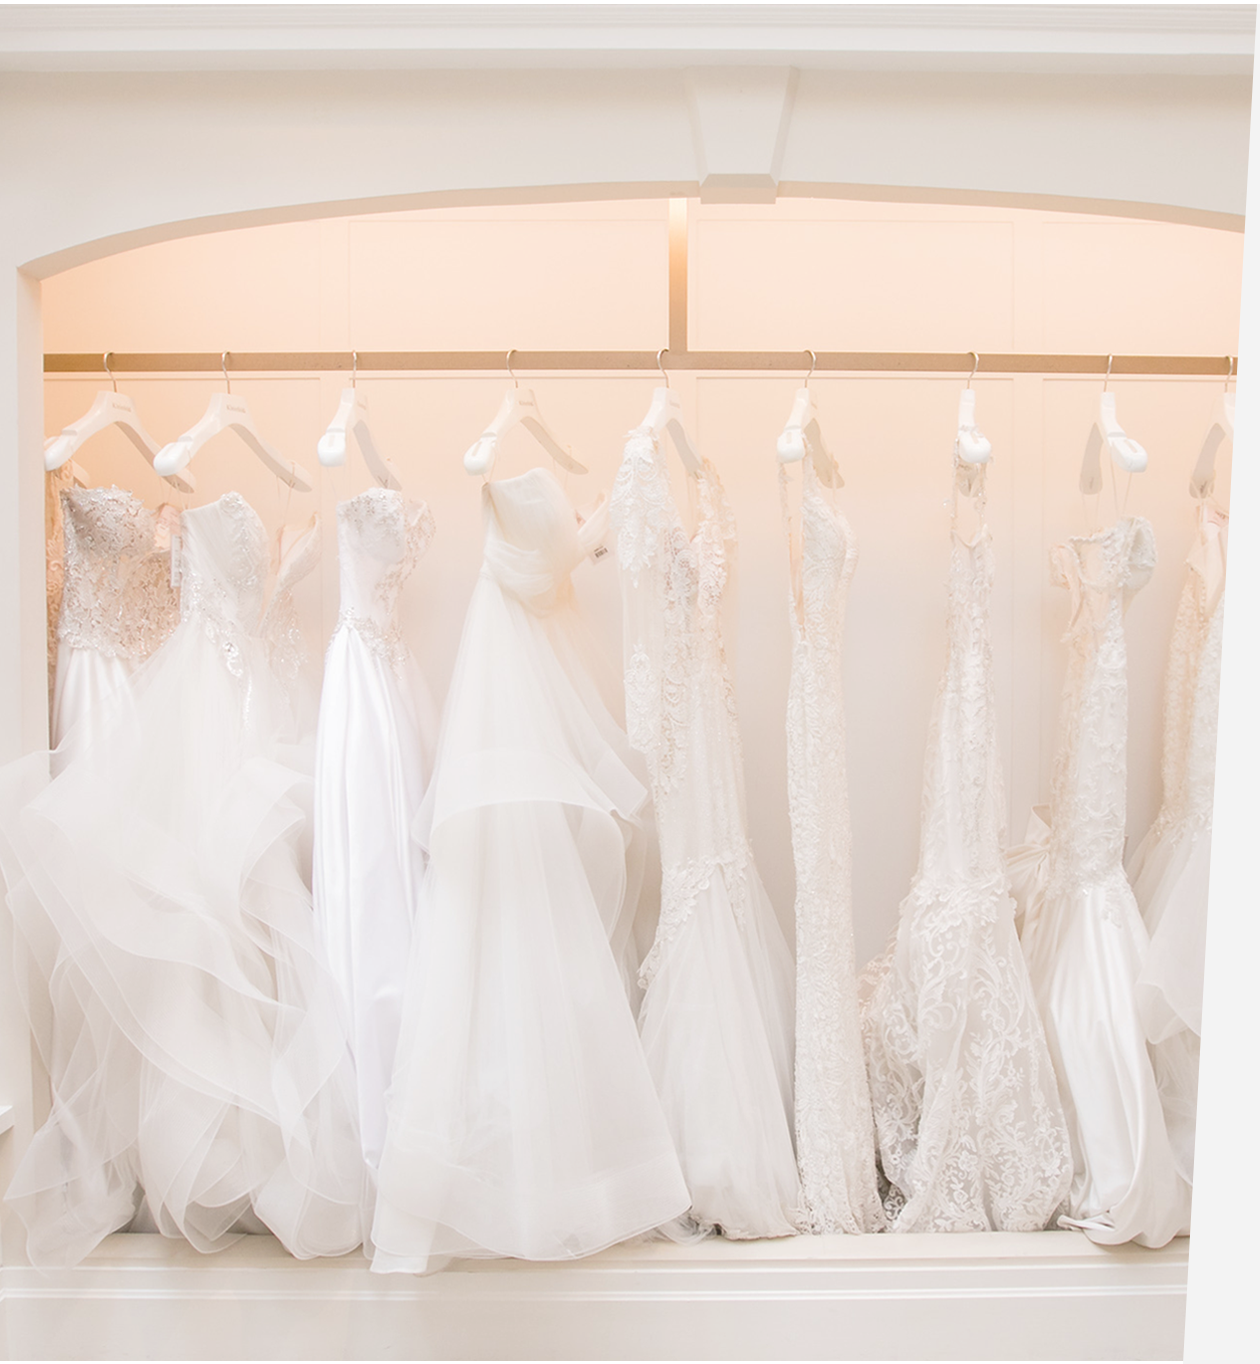 Kleinfeld Bridal | The Largest Selection of Wedding Dresses in the World!